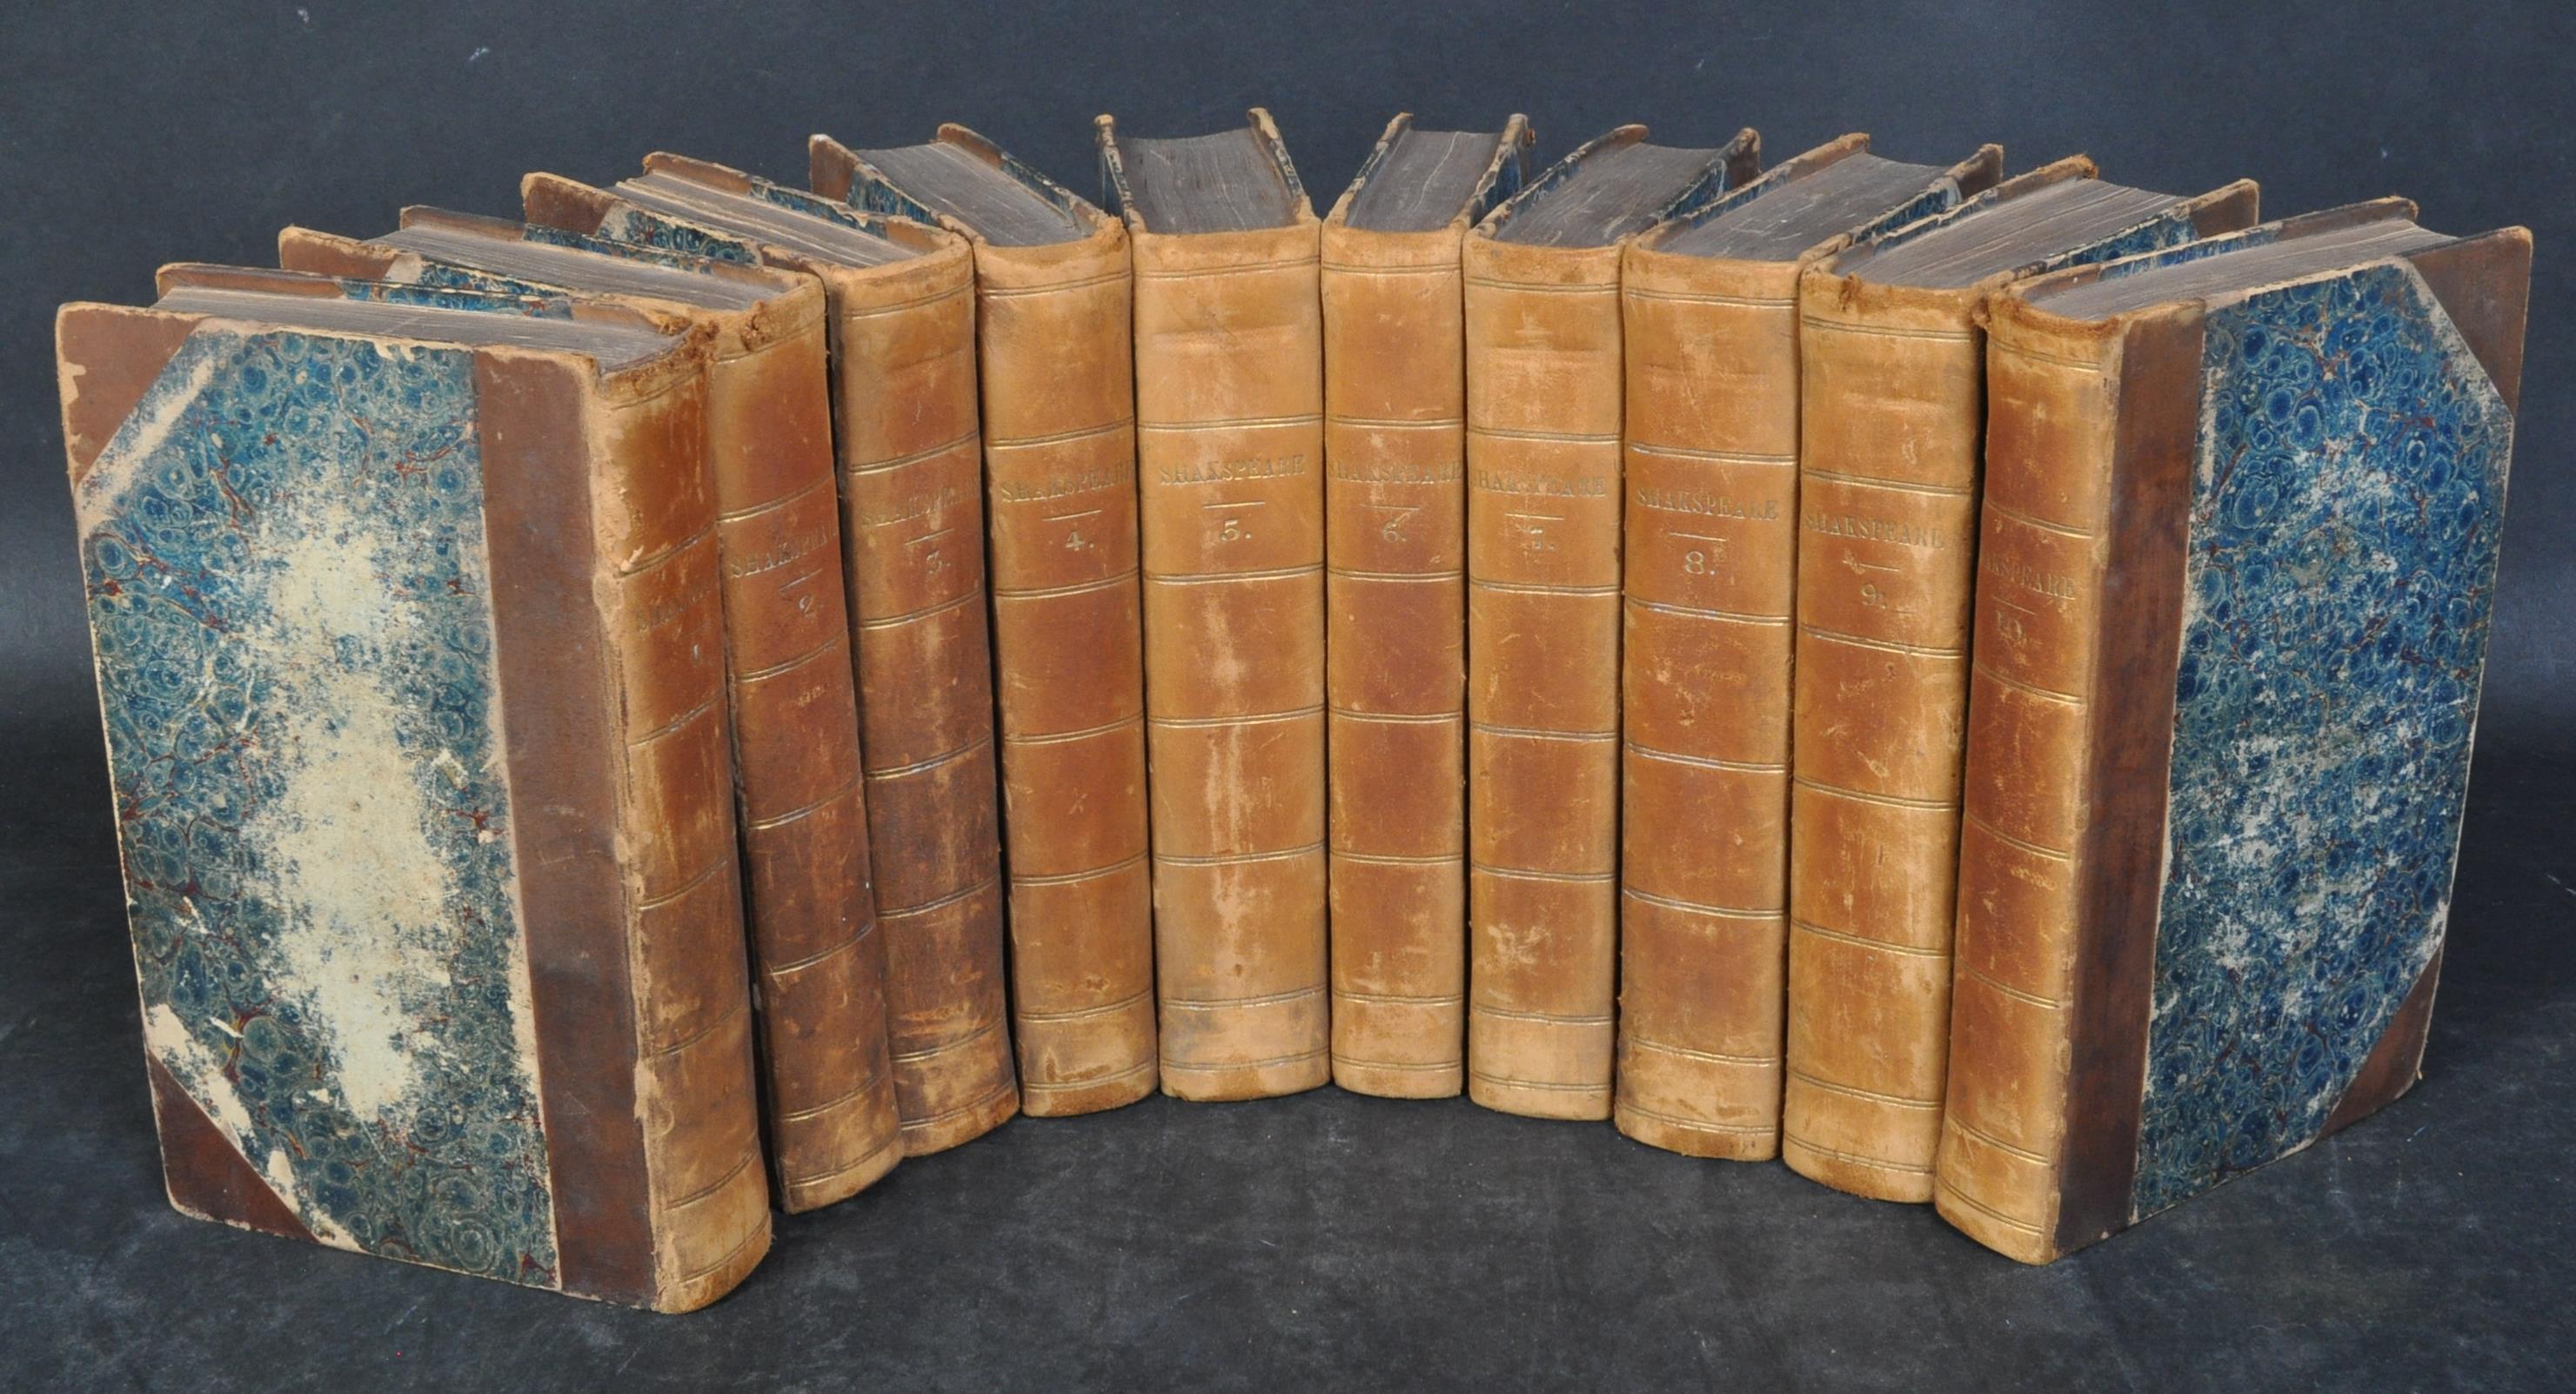 THE PLAYS OF WILLIAM SHAKESPEARE - IN TEN VOLUMES